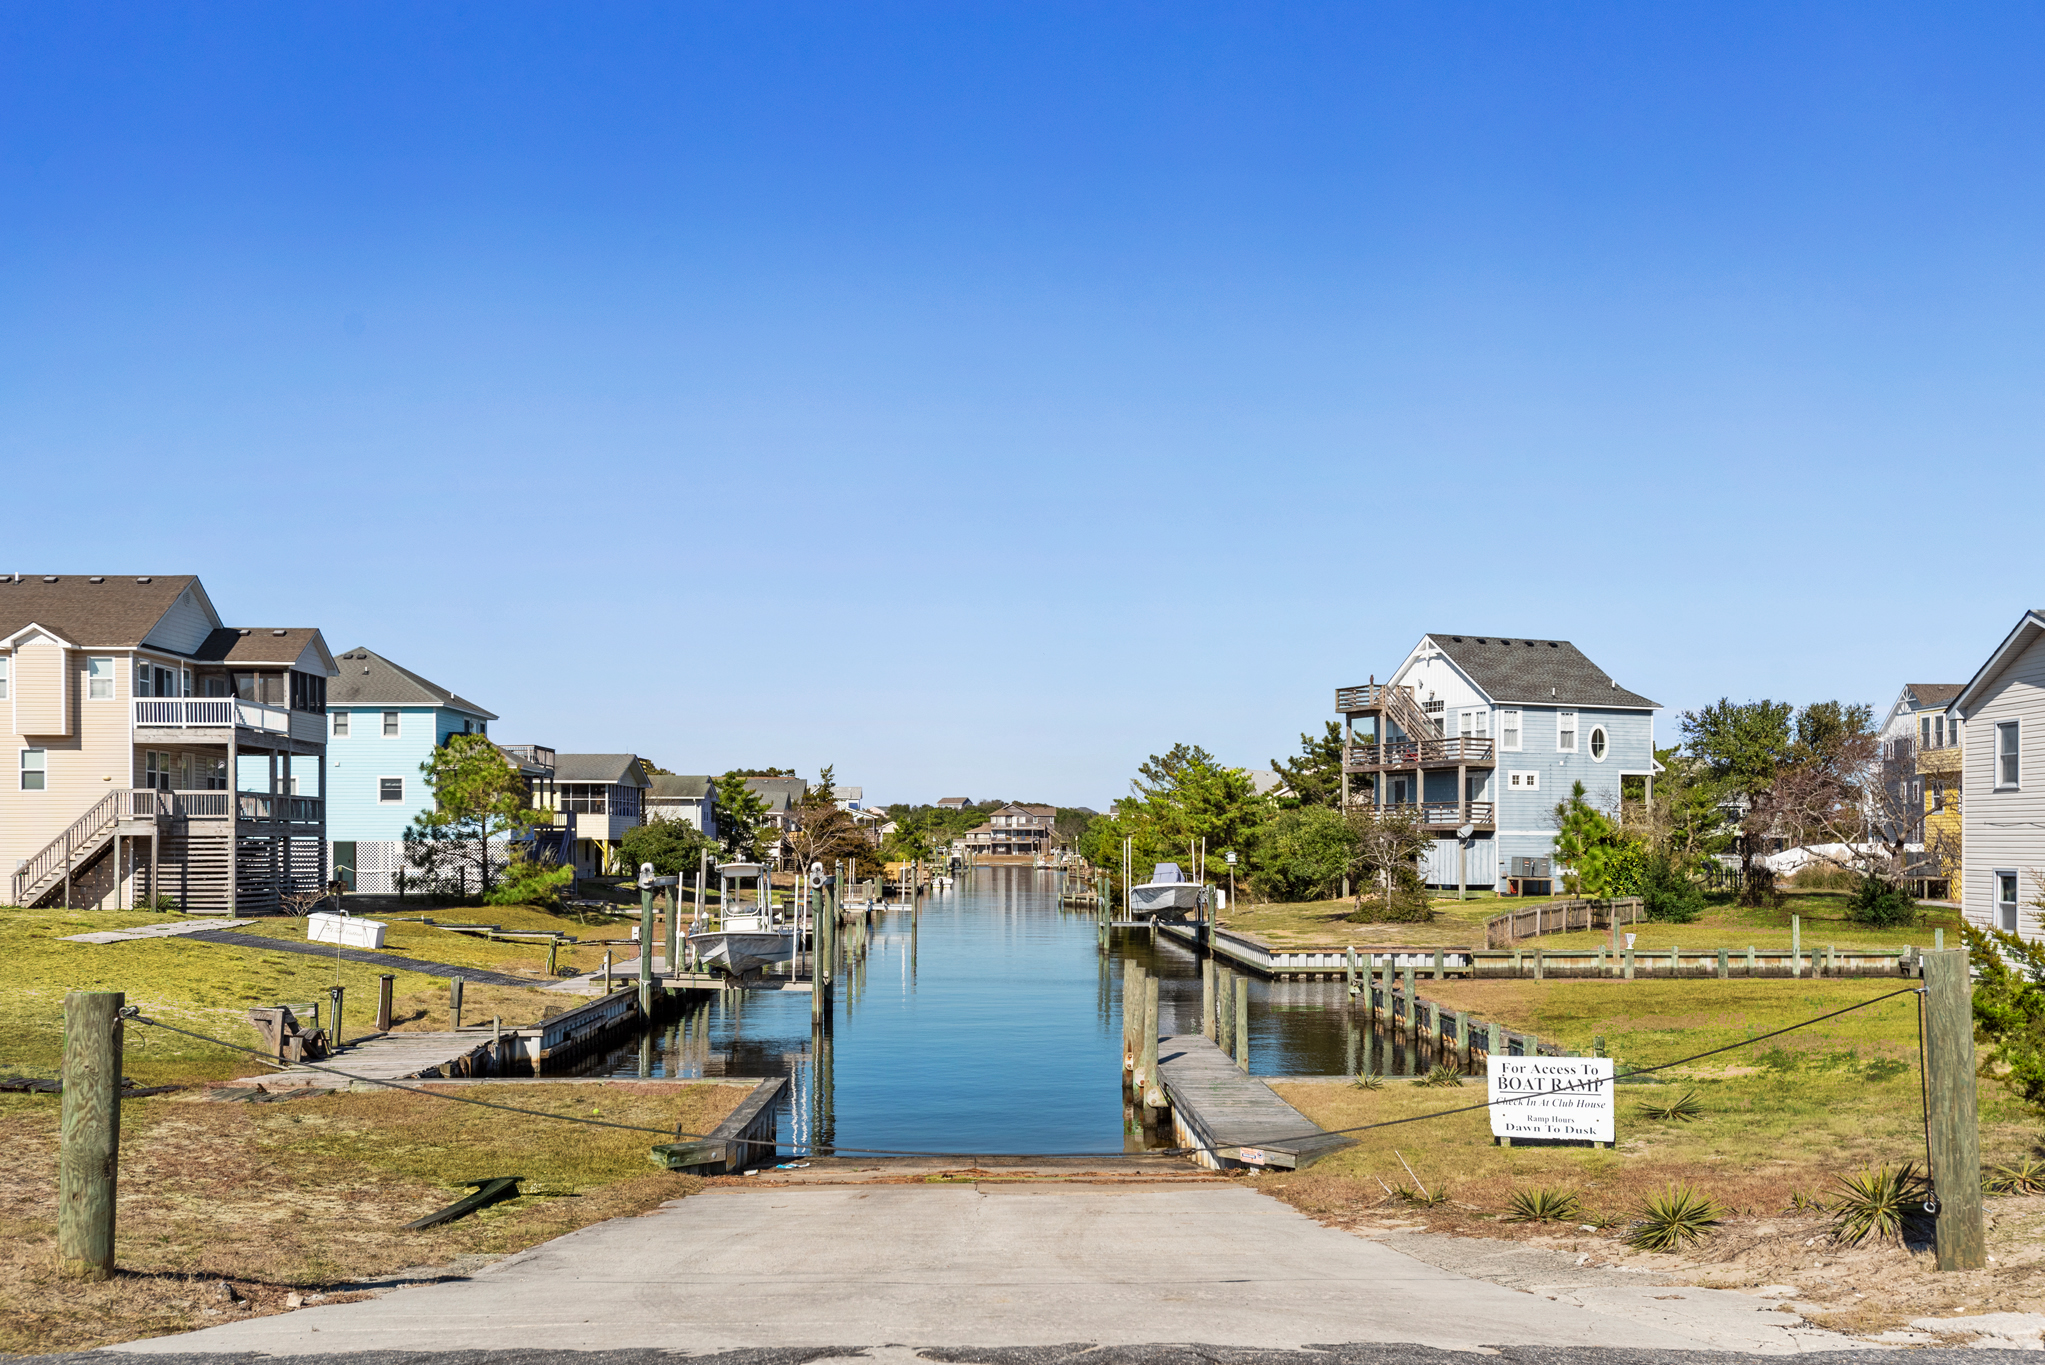 Old Nags Head Cove | Boat Ramp (Small Fee Required)